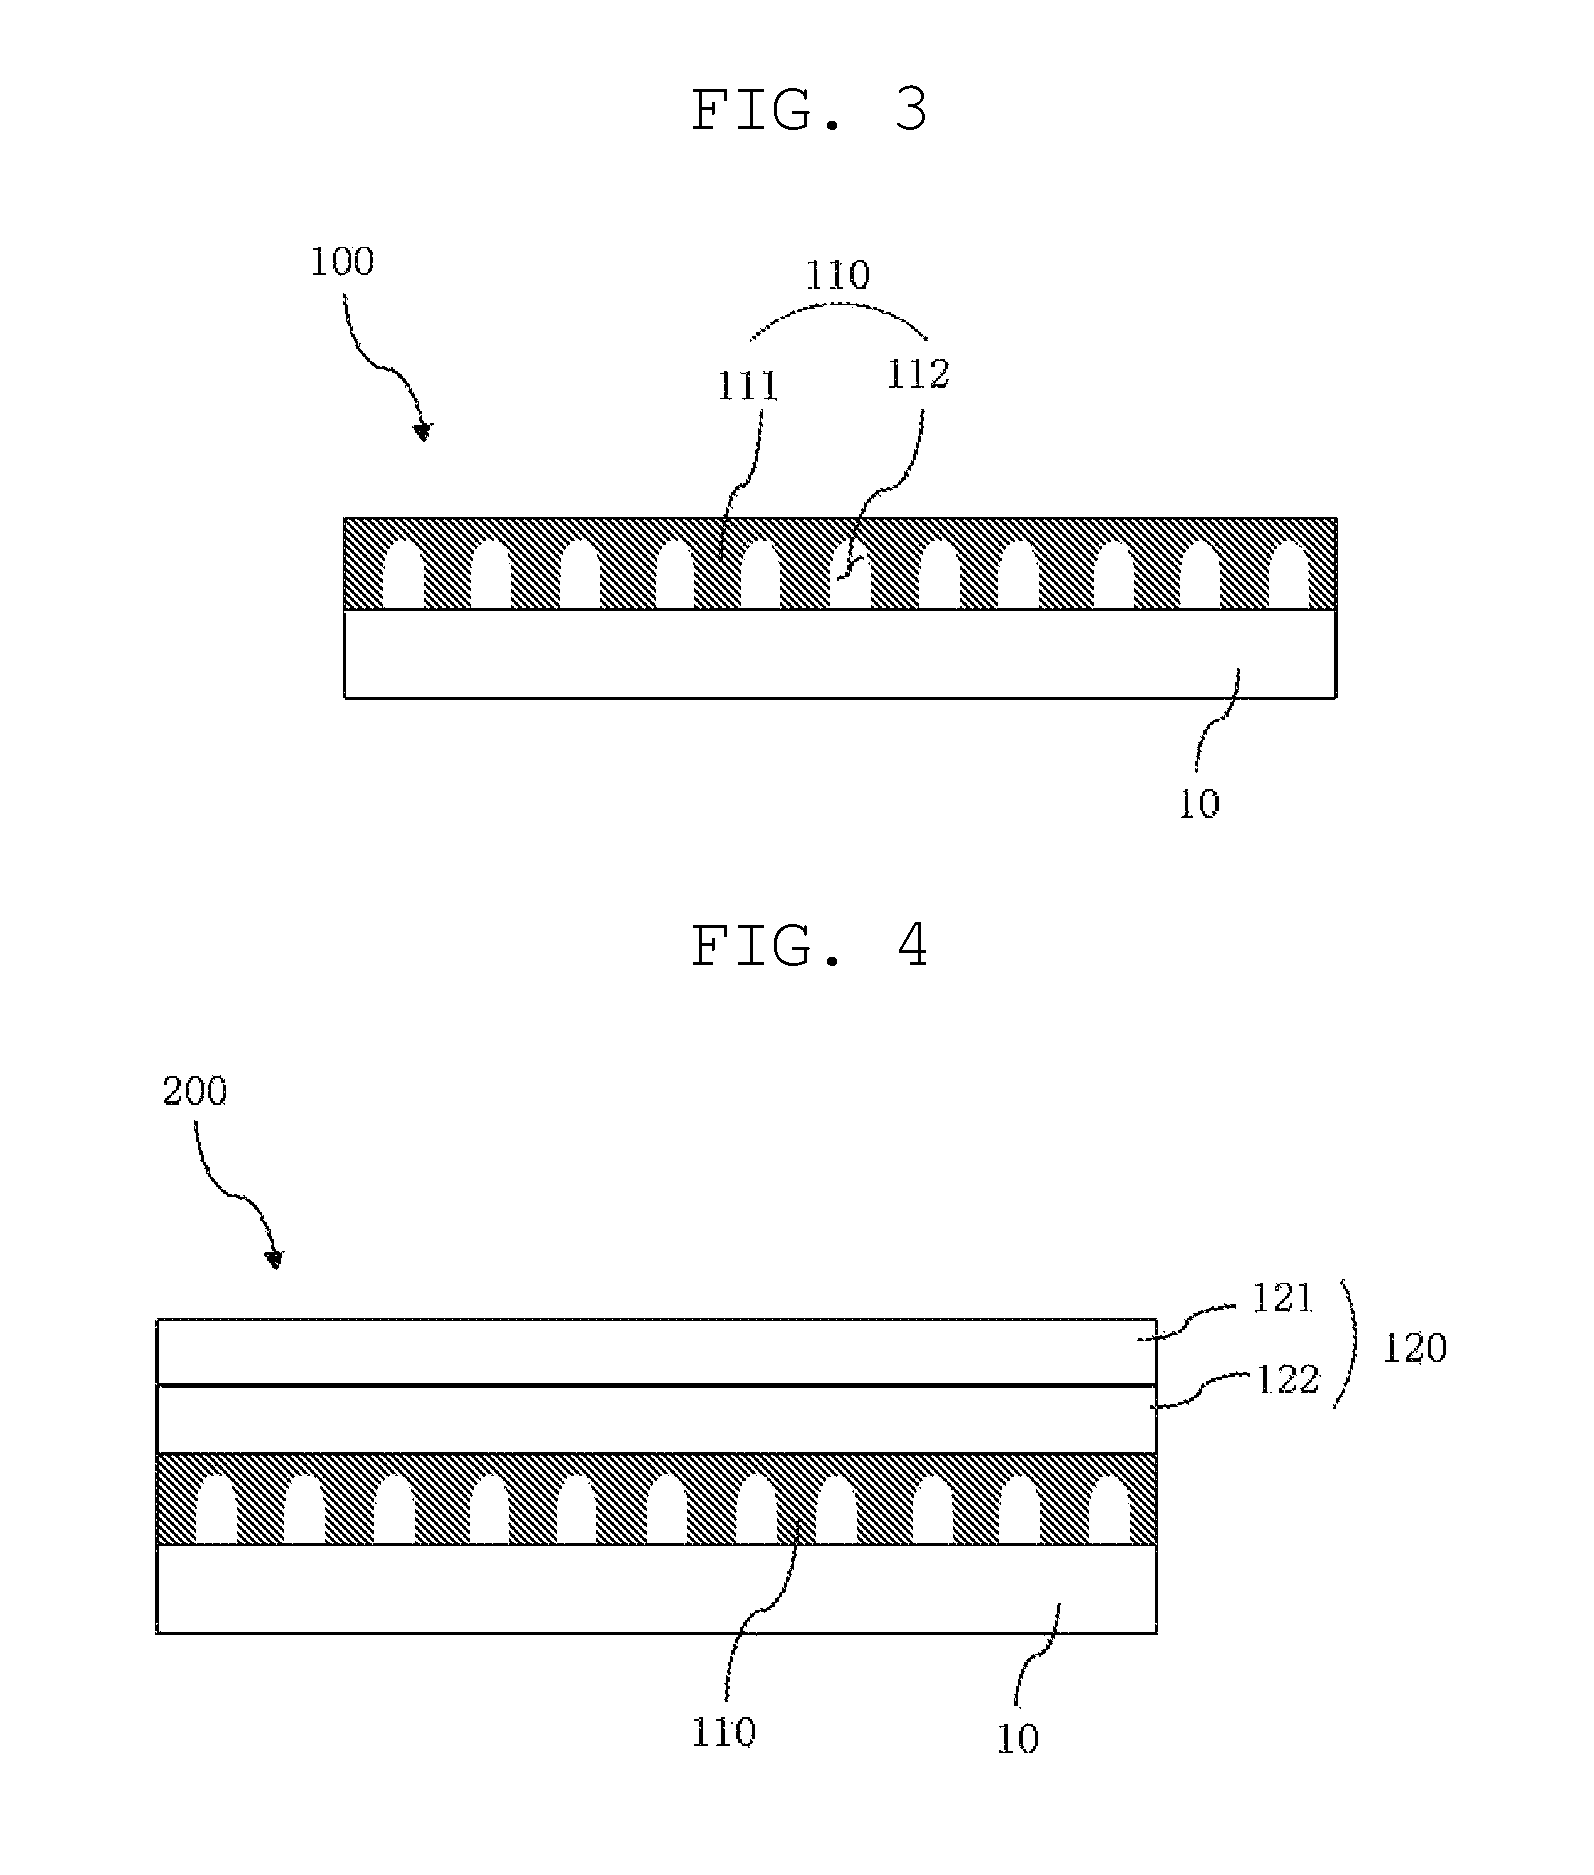 Organic light emitting display having improved color shift and visibility